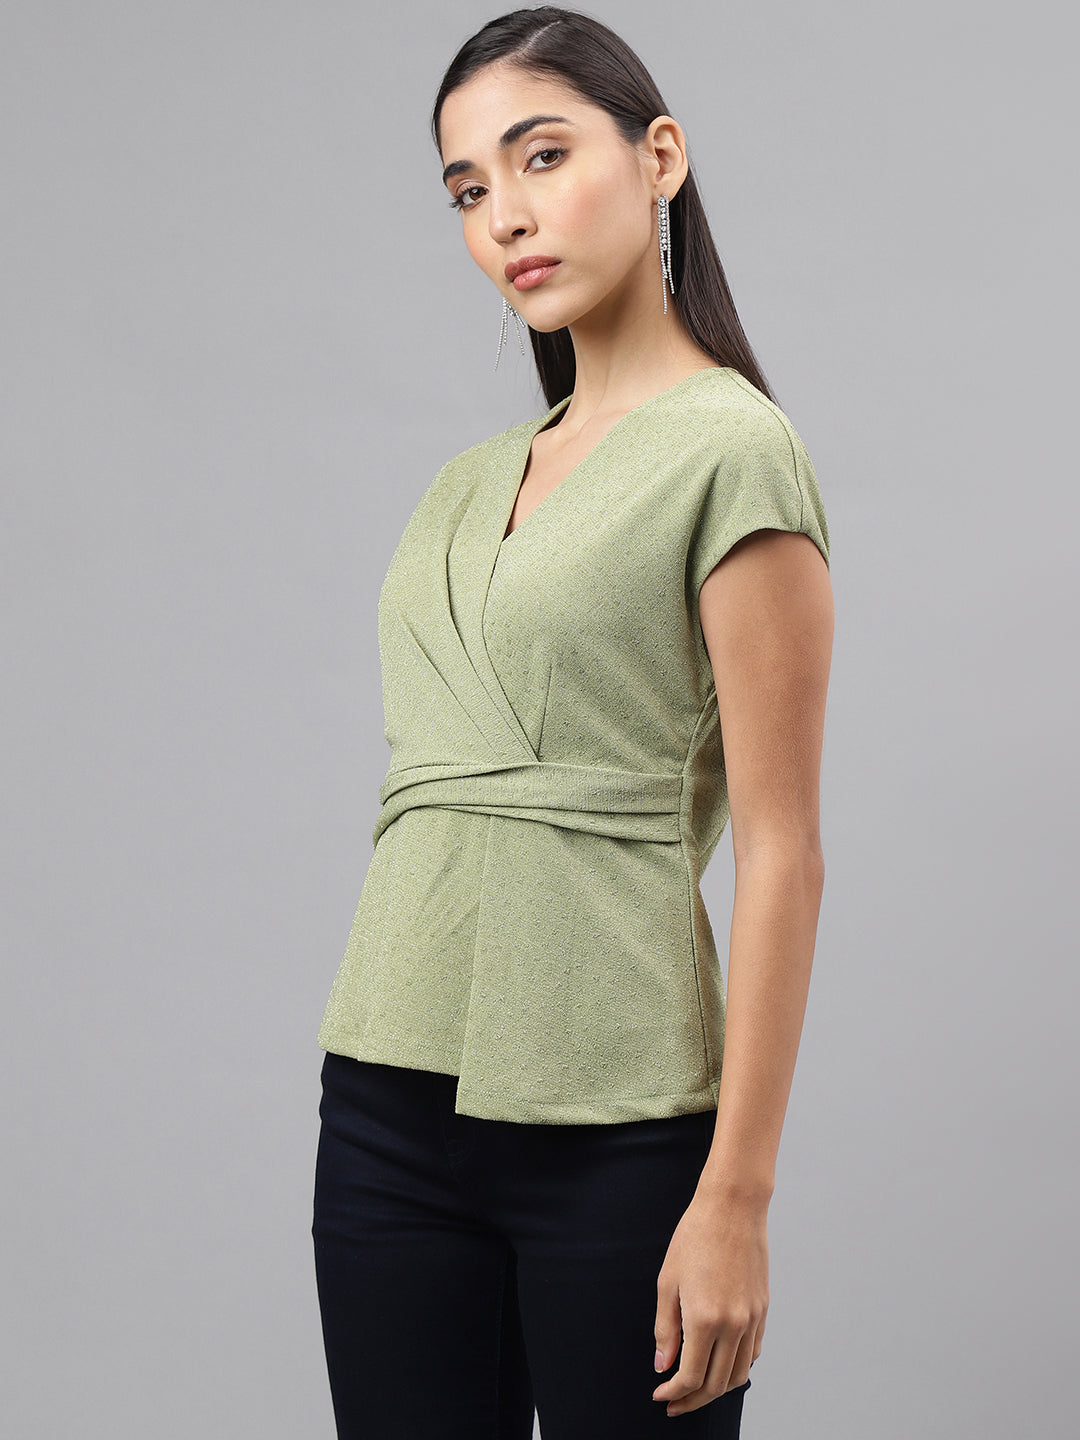 Green Cap Sleeve V-Neck Solid Knit Top